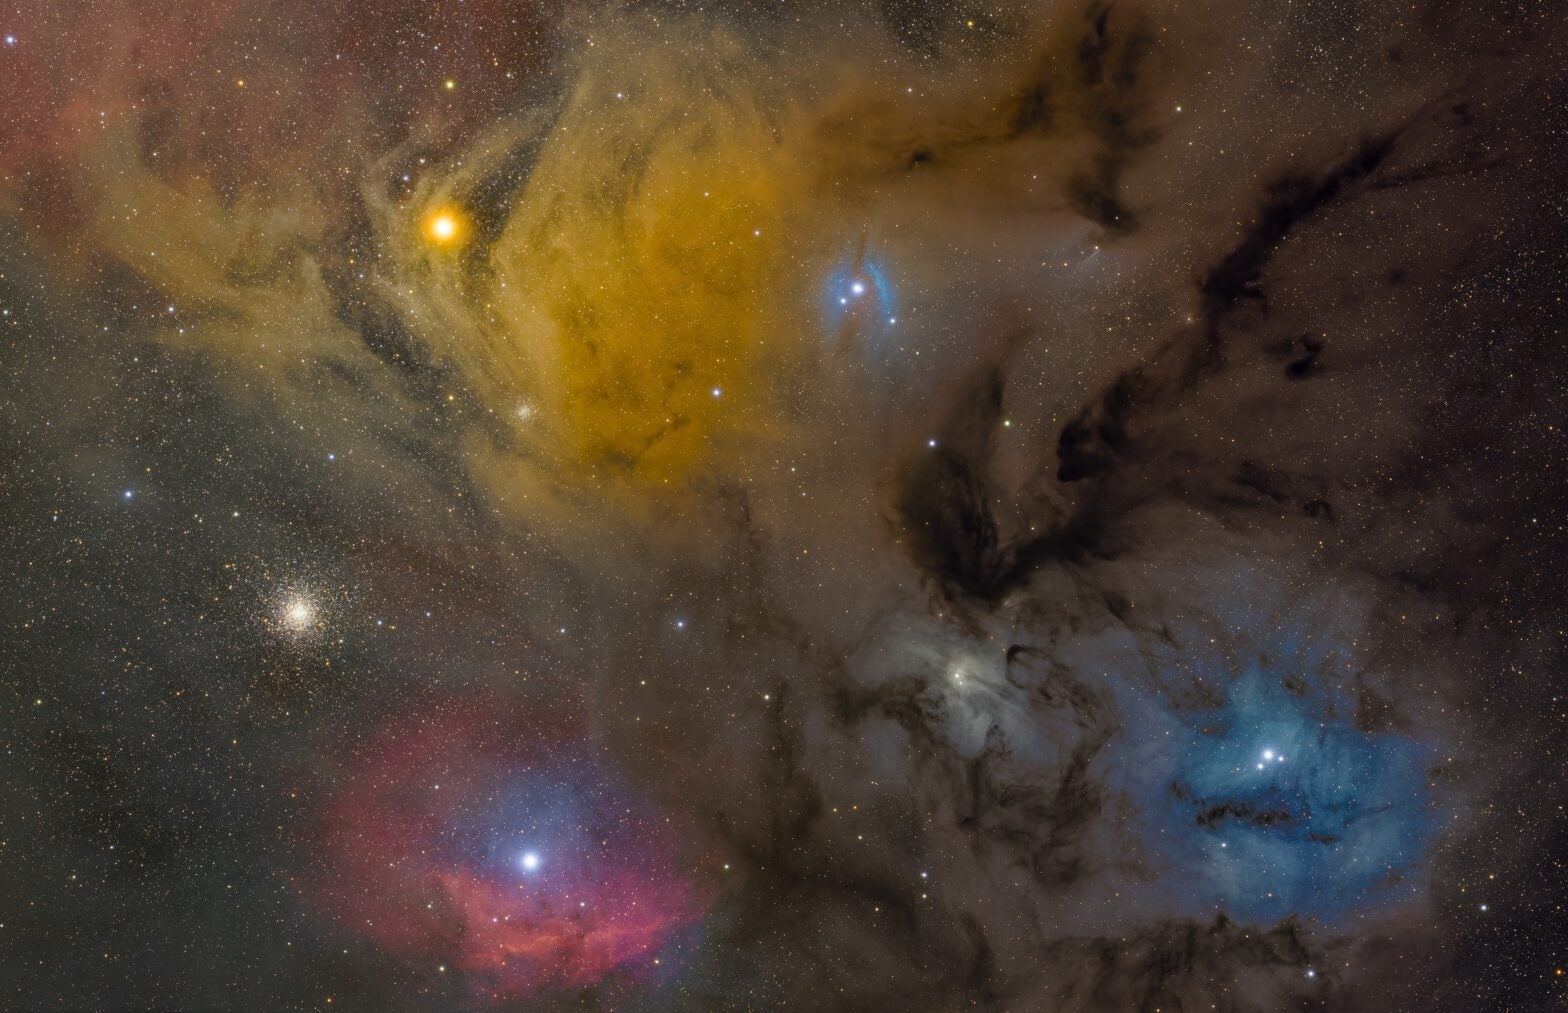 A photograph of the Rho Ophiuchi cloud complex. The image is dominated by swirling nebulae in various colors — yellows, blues, and hints of red and pink. At lower left lies the star Antares, enveloped by a golden yellow cloud. In the upper right is Rho Ophiuchi, surrounded by a blue reflection nebula. The background is filled with countless stars of varying brightness. Dark dust lanes create striking contrasts throughout the image, particularly in the center. The overall effect is a rich, colorful cosmic tapestry of gas, dust, and stars.